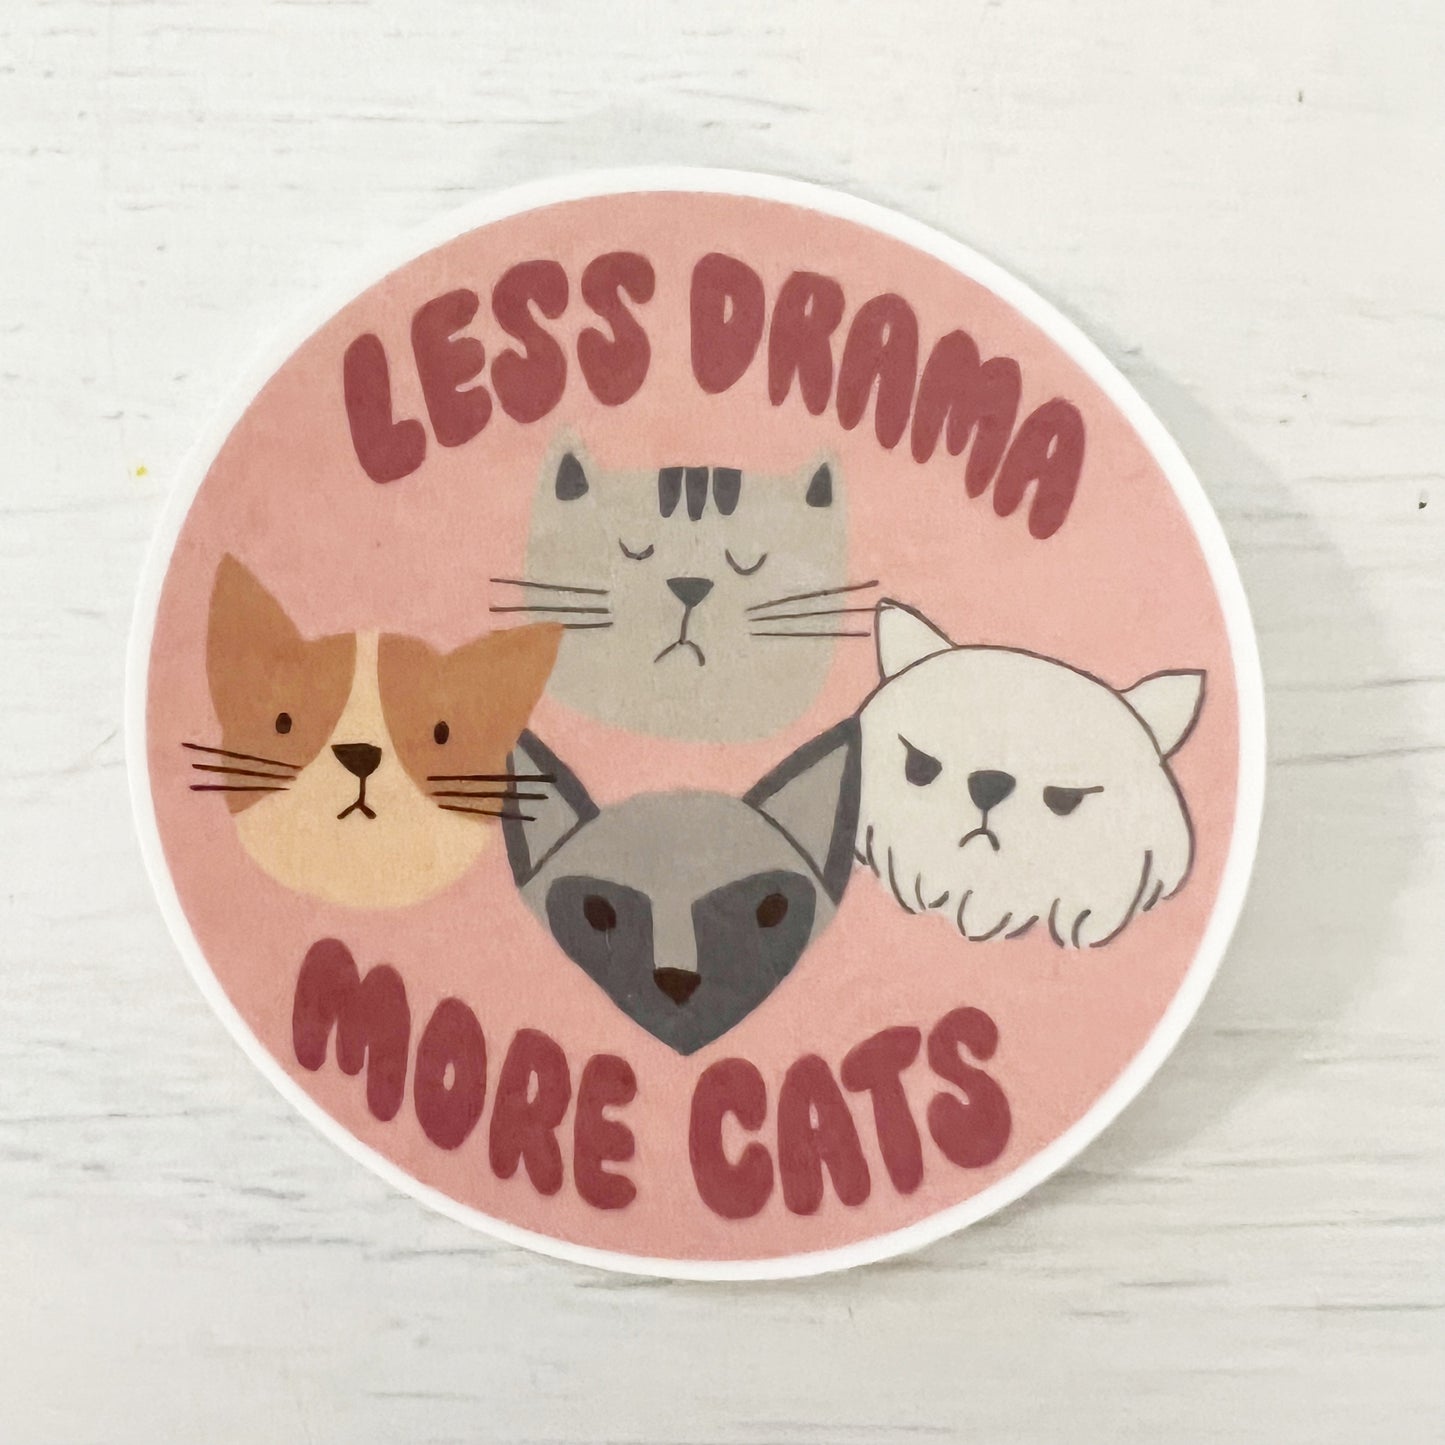 Less Drama More Cats Sticker Decal